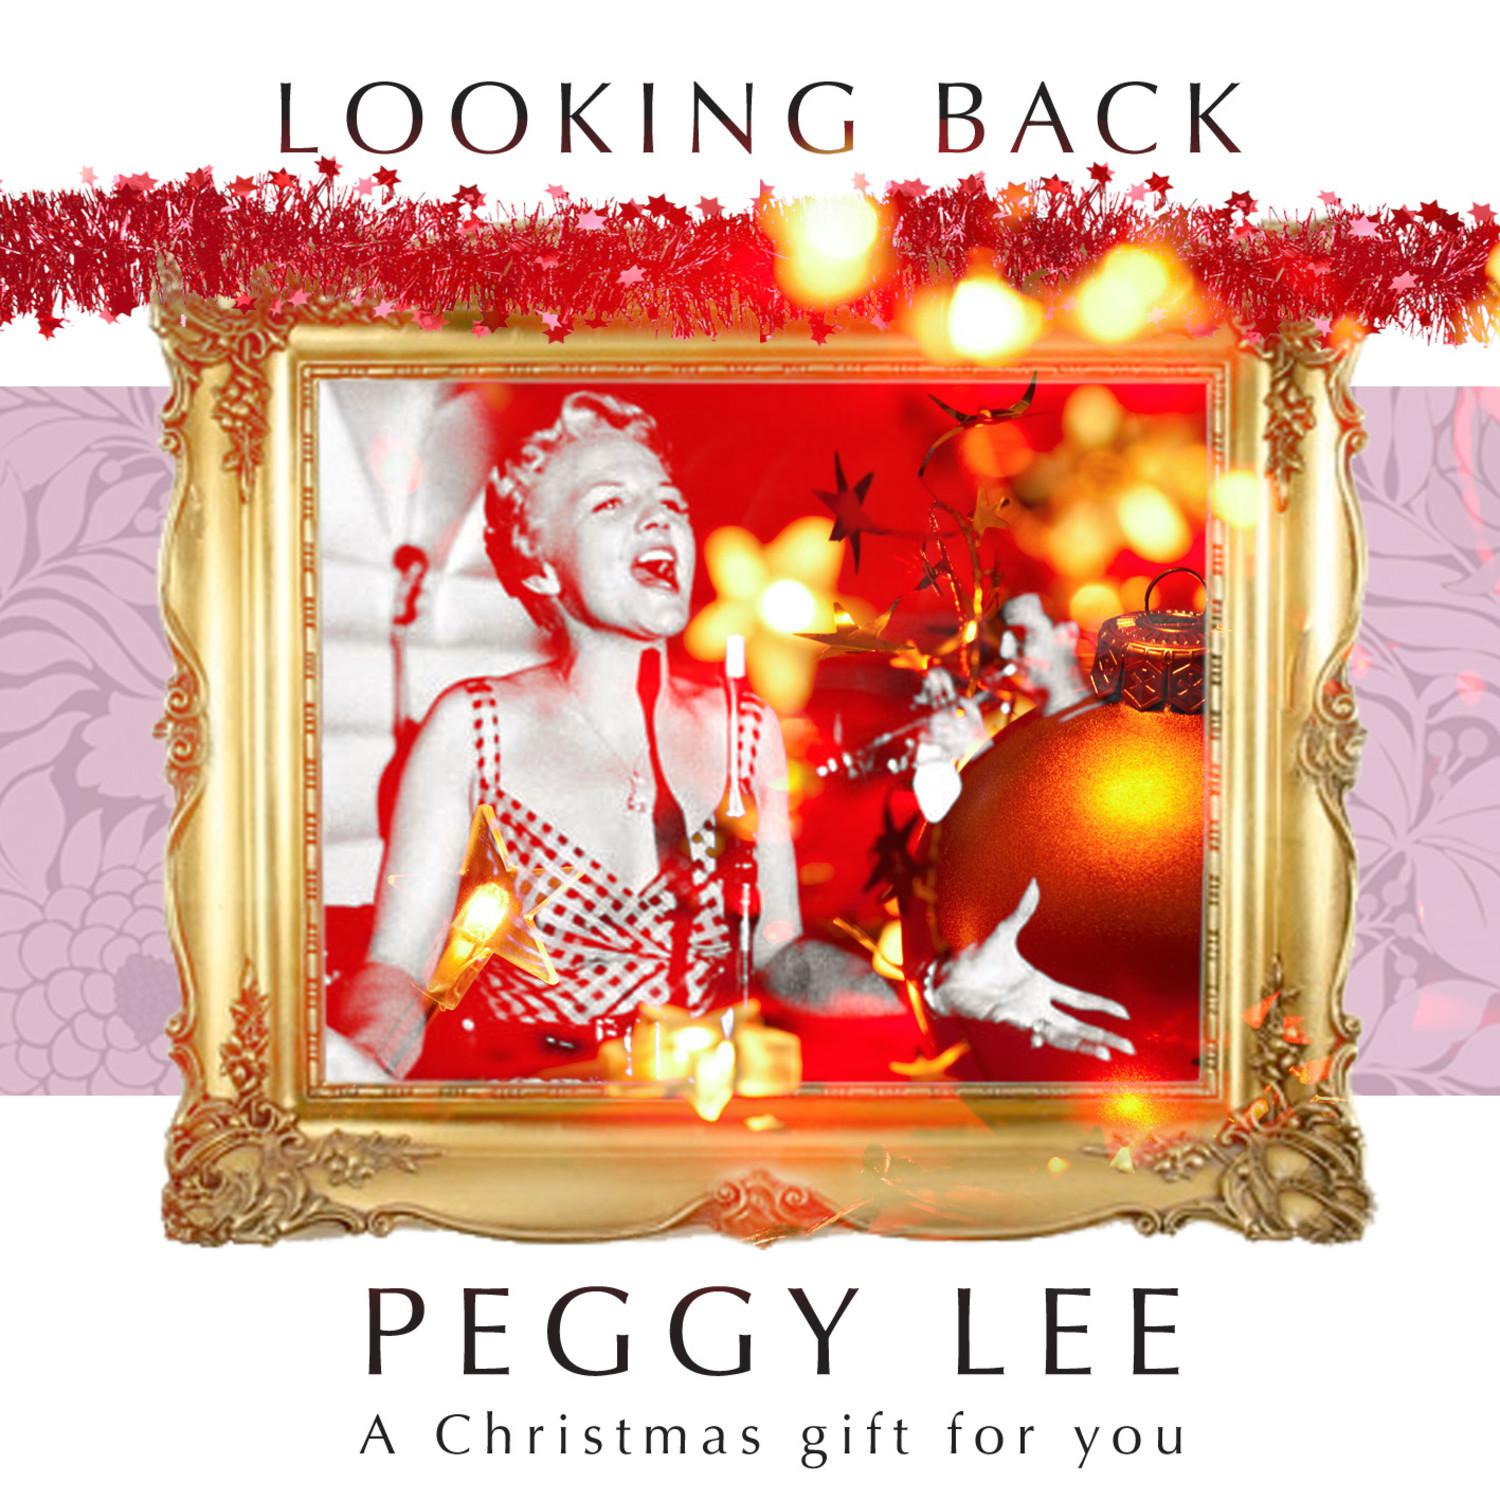 Peggy Lee - A Christmas Gift For You - Looking Back